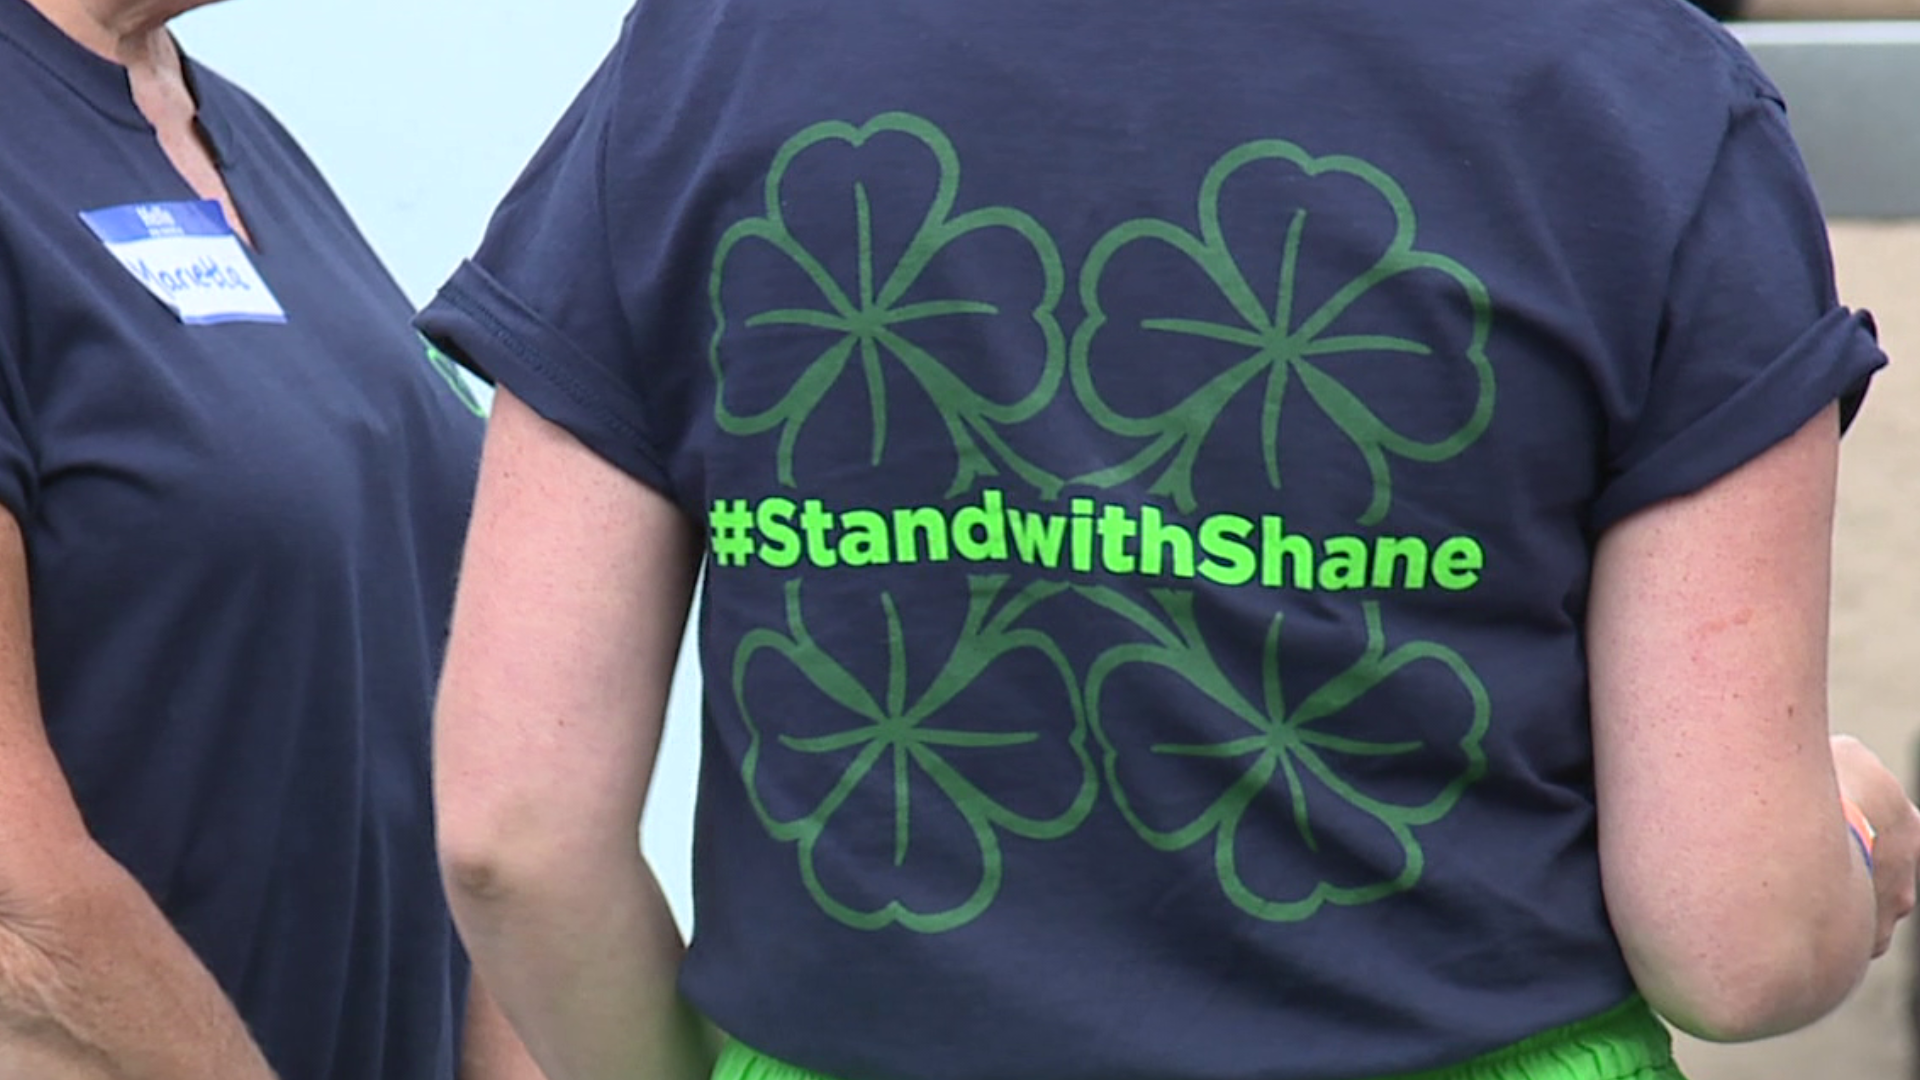 Shane Conway of Scranton is currently battling brain cancer at a hospital in Philadelphia.